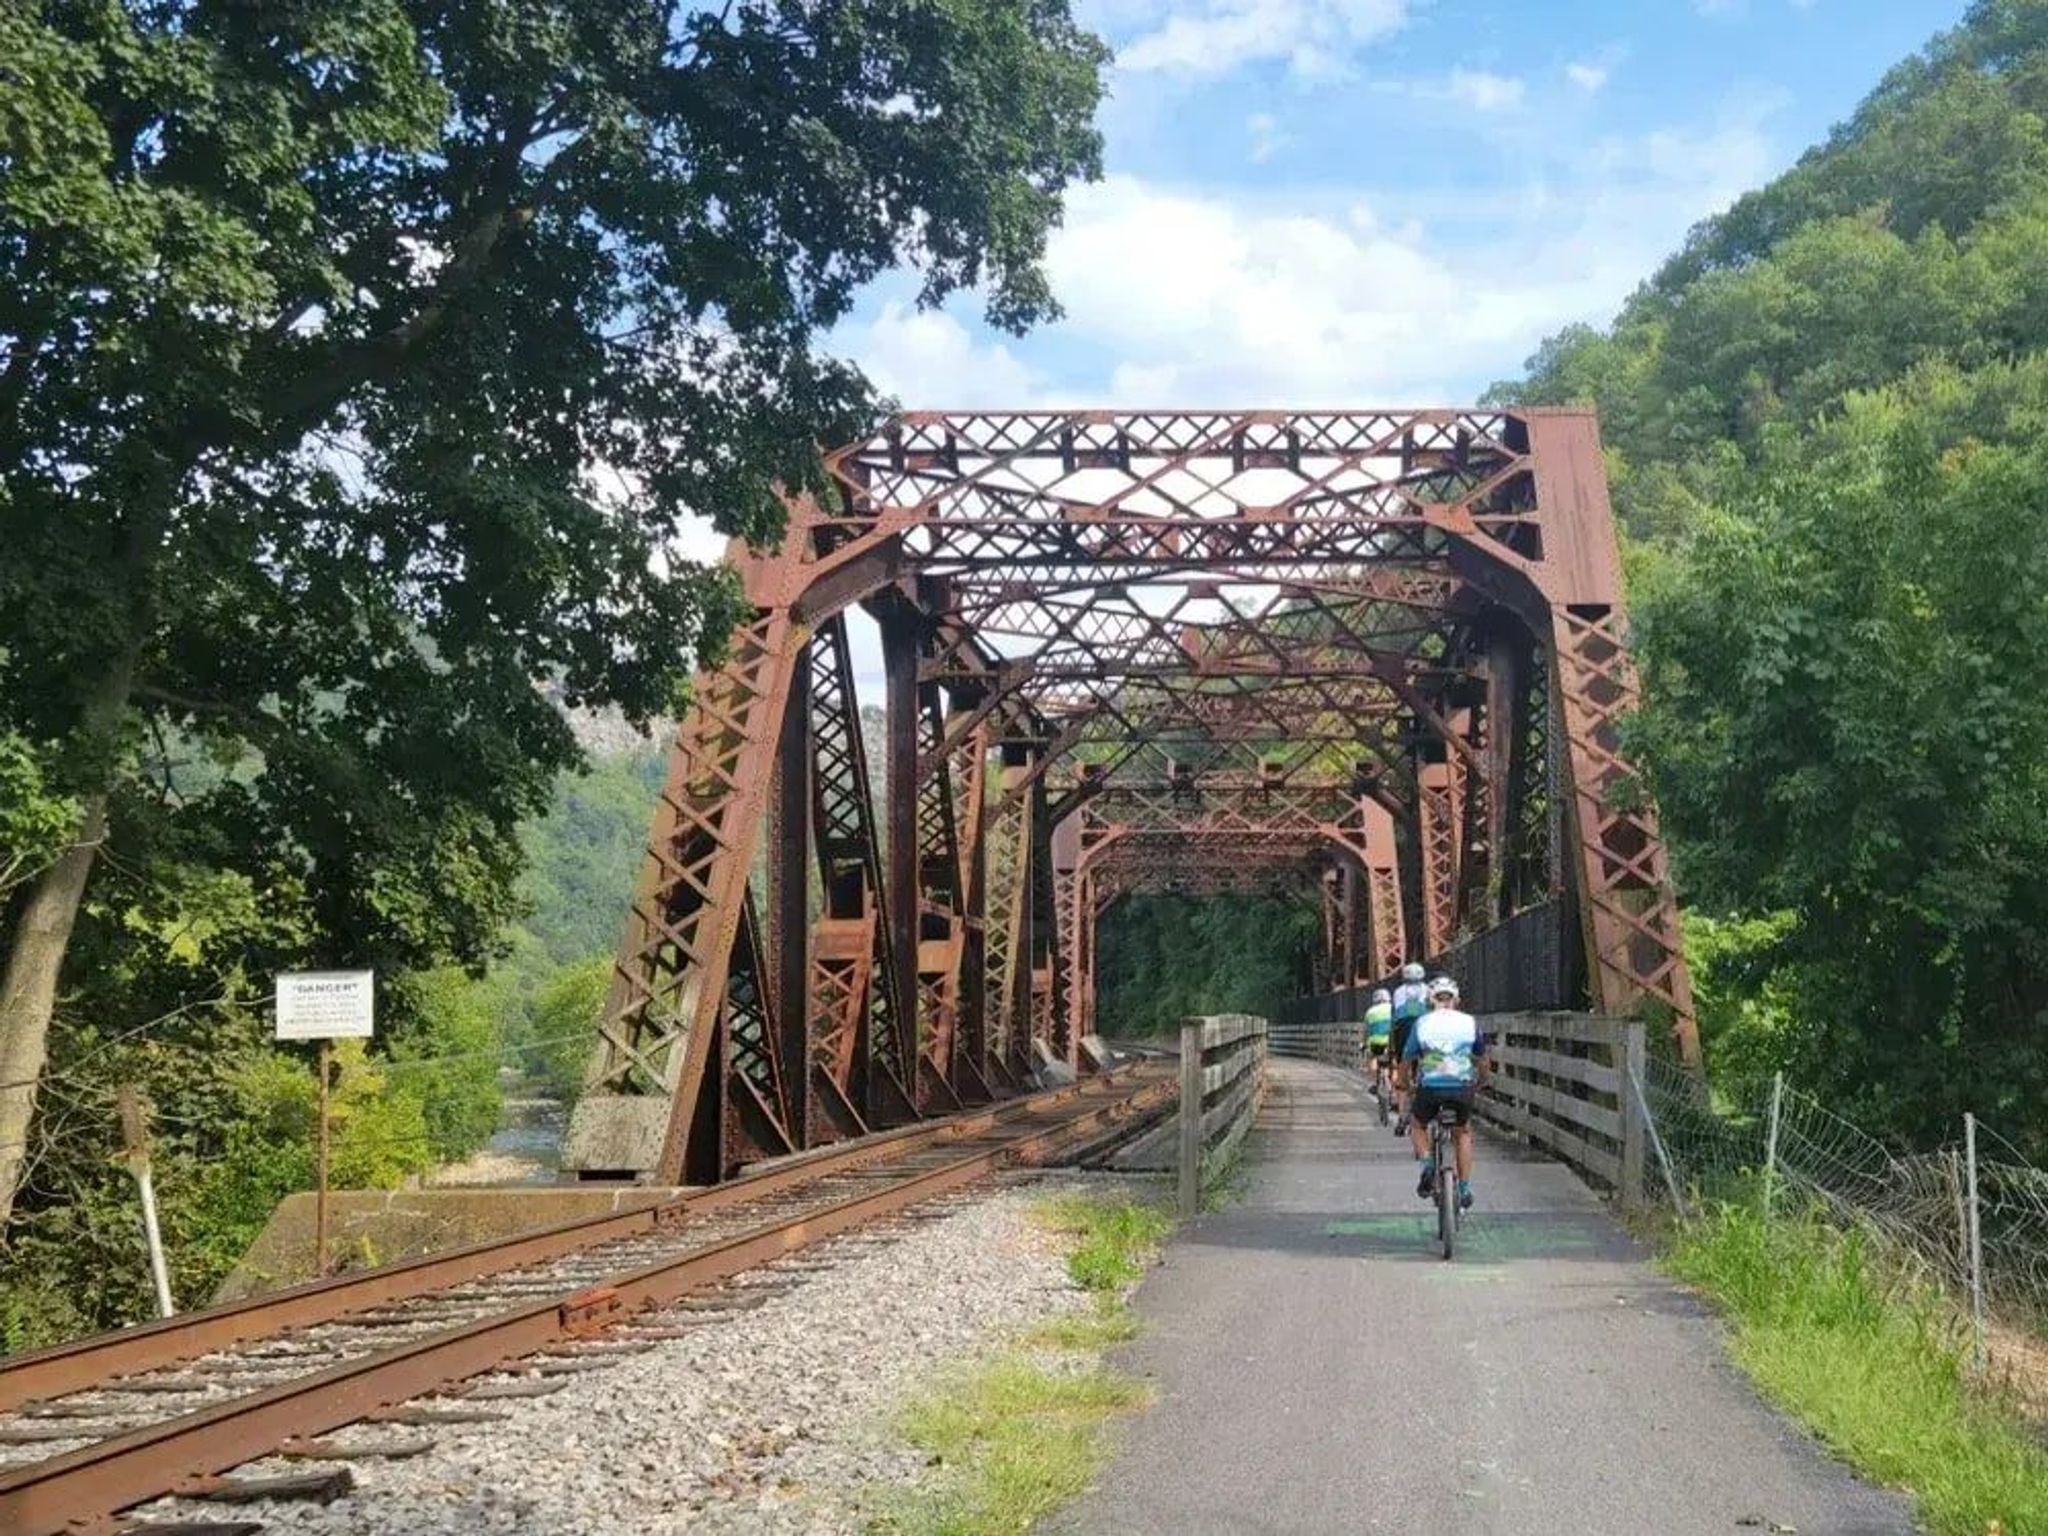 The Great Allegheny Passage runs 135 from near Pittsburgh to Cumberland, MD where it joins the C&O Canal Towpath trail.